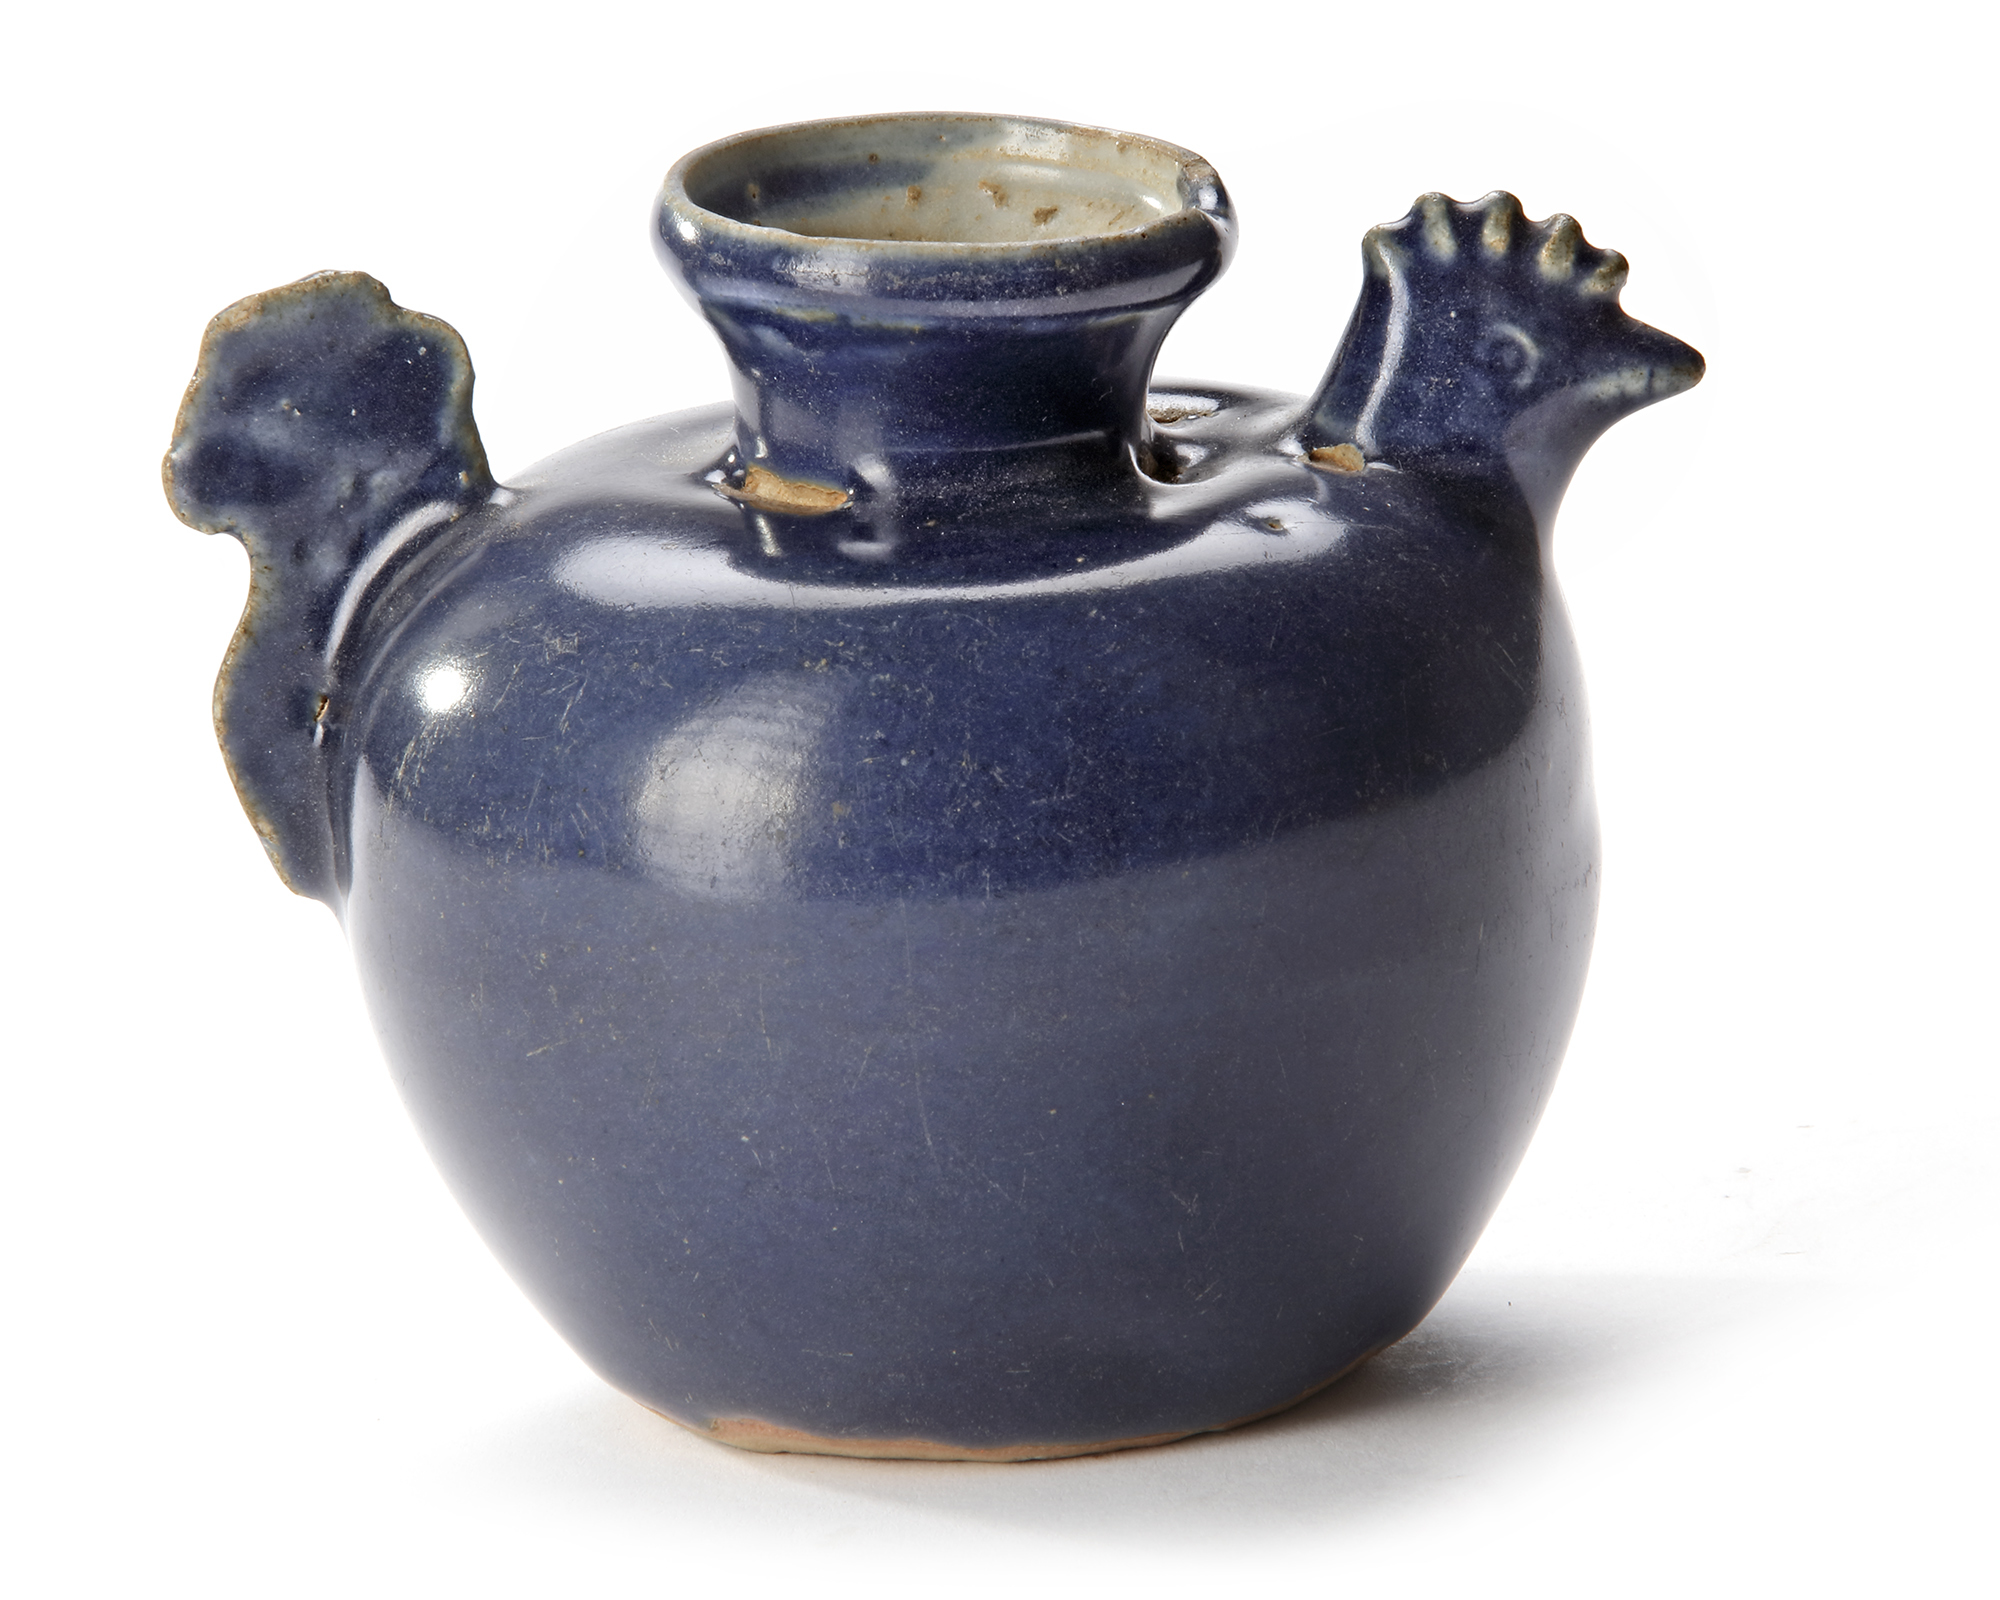 A CHINESE COBALT BLUE GLAZED CHICKEN EWER, MING DYNASTY, 16TH CENTURY - Image 2 of 4